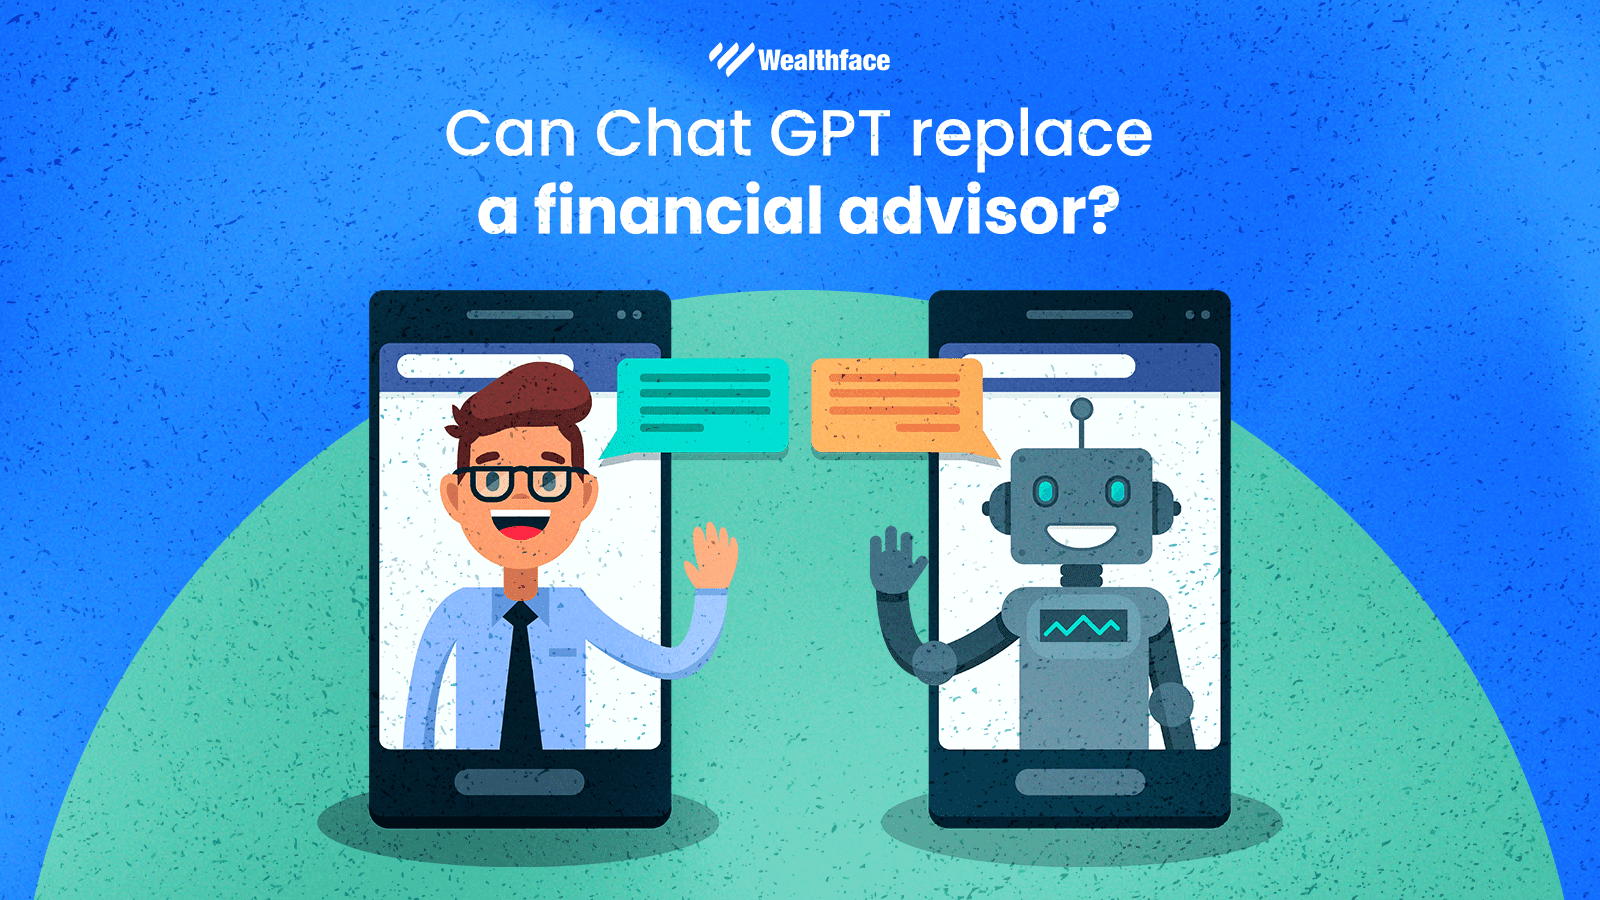 Can Chat GPT replace an advisor?